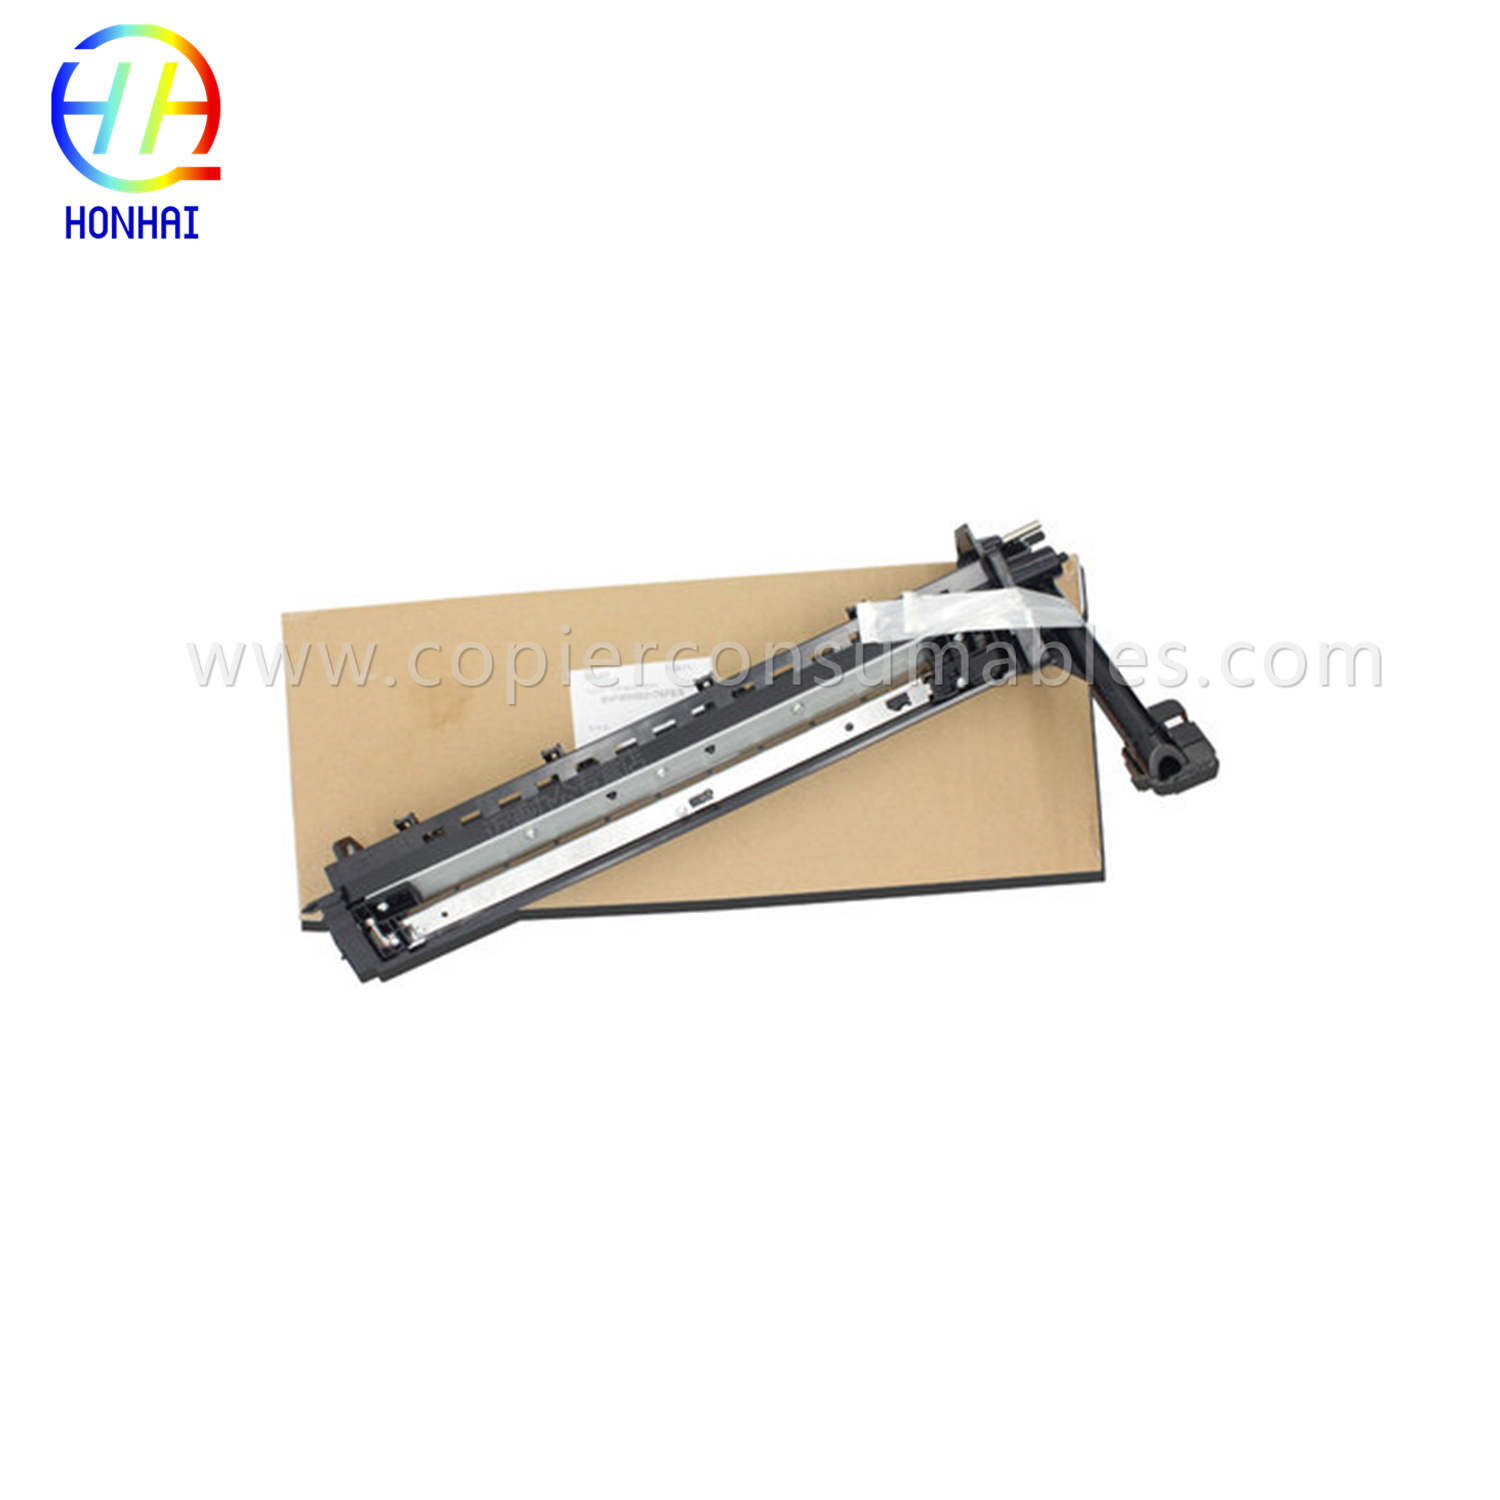 Drum Frame Assembly for Sharp Ar-5320 5320d Arm-160 162 205 207 (Sharp CFRM-0021RS5T CFRM-0021RS6D Toshiba 6LS11678000) OEM